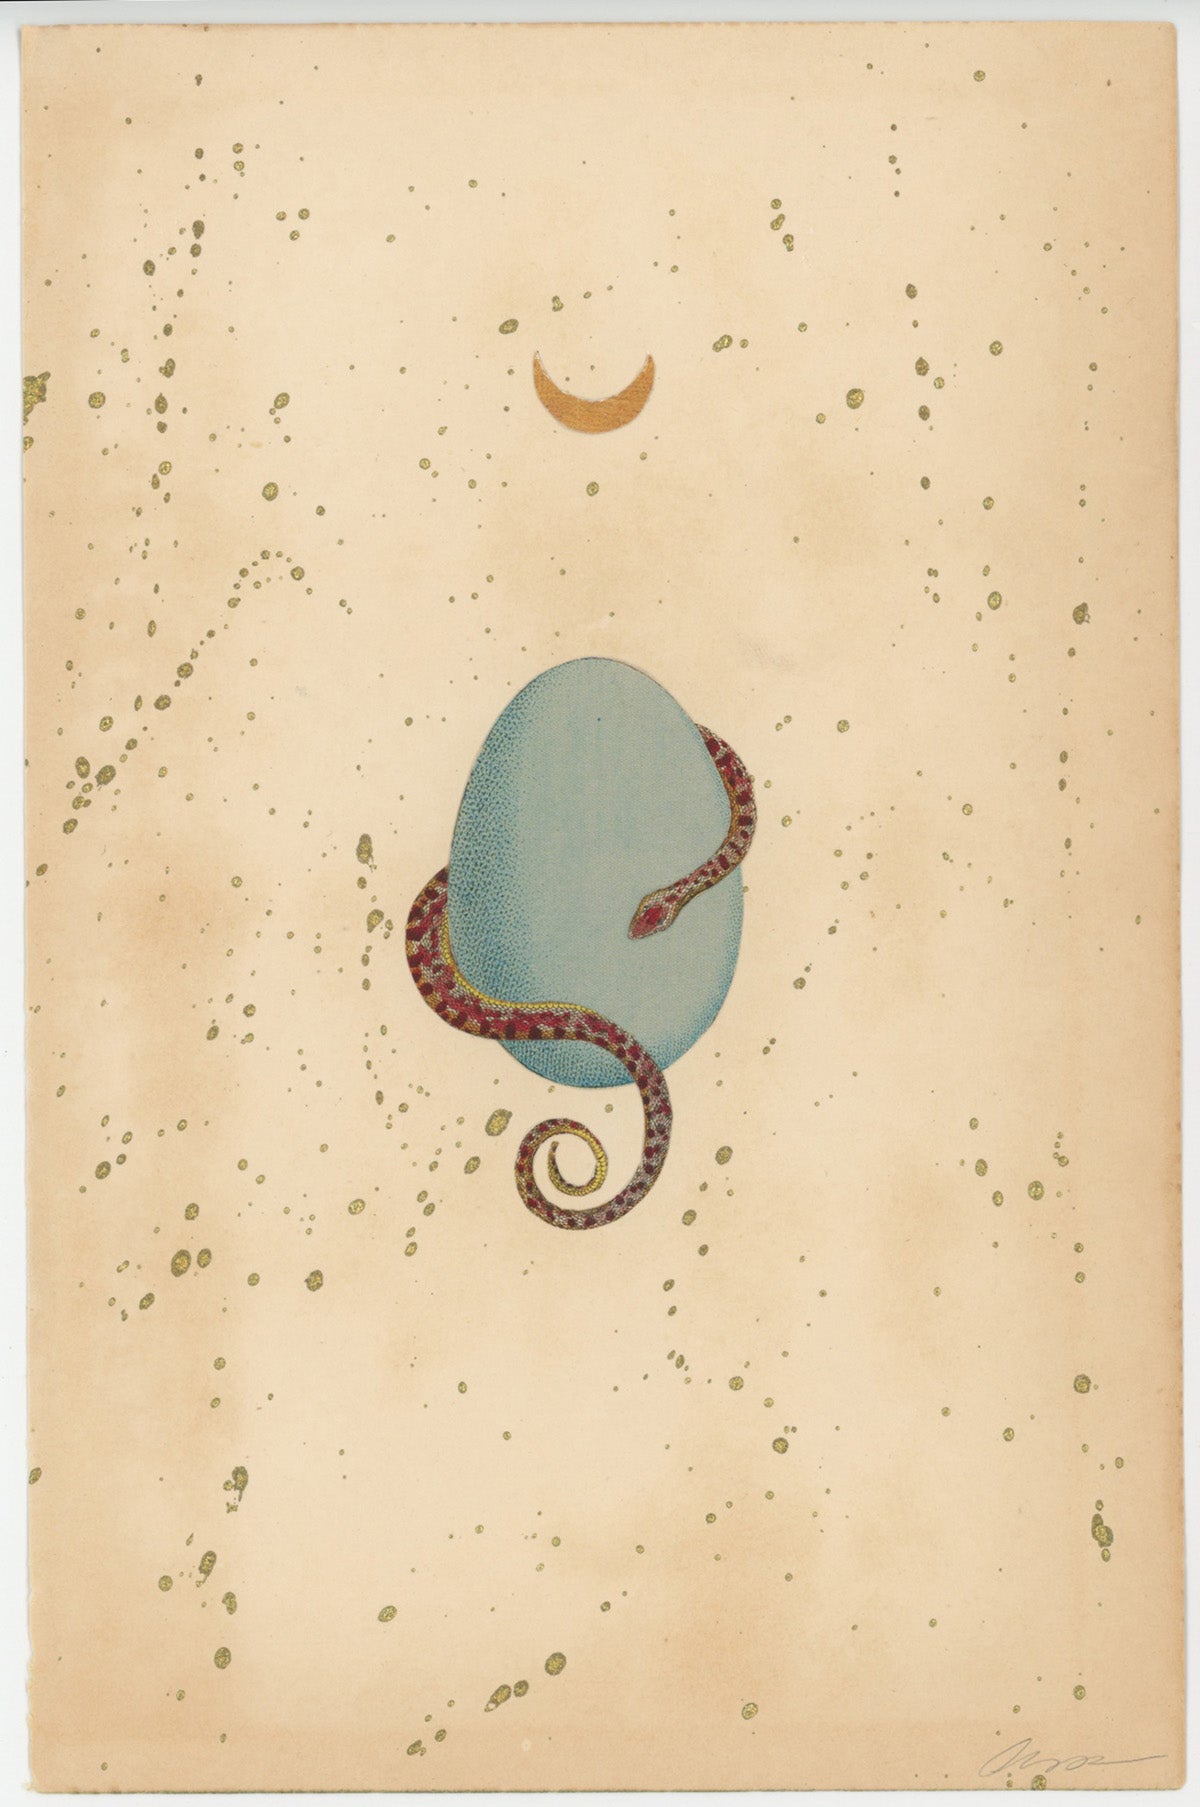 Red/Blue Orphic Egg with Crescent Moon collage